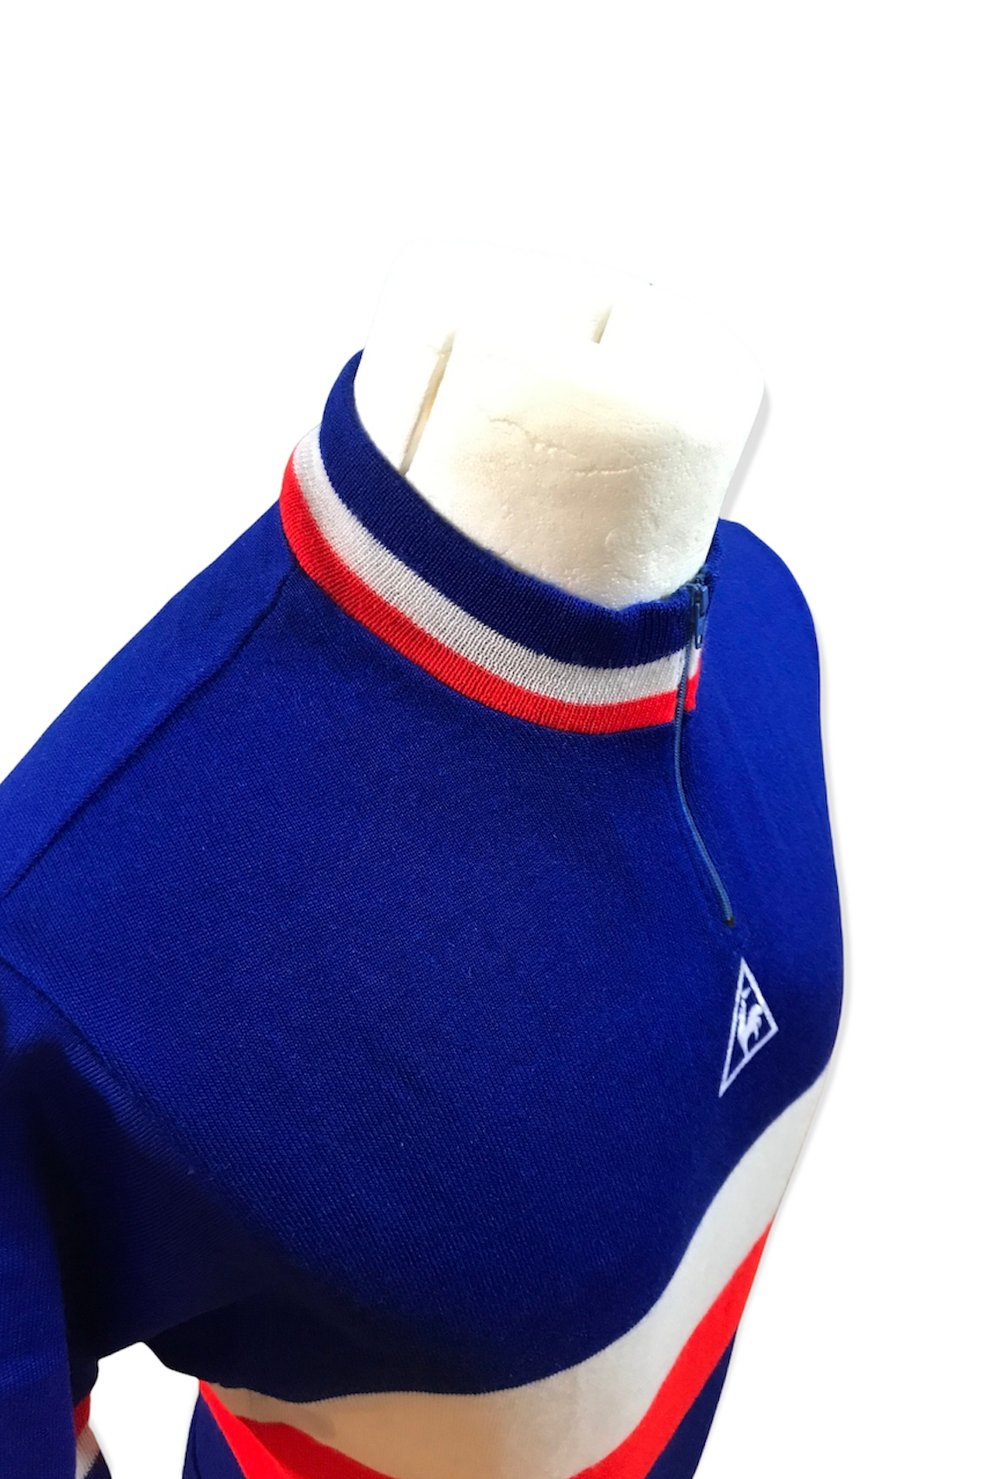 StÃ©phane Guay ðŸ‡«ðŸ‡· 1985 used national jersey for the World Amateur Road Cycling Championships 